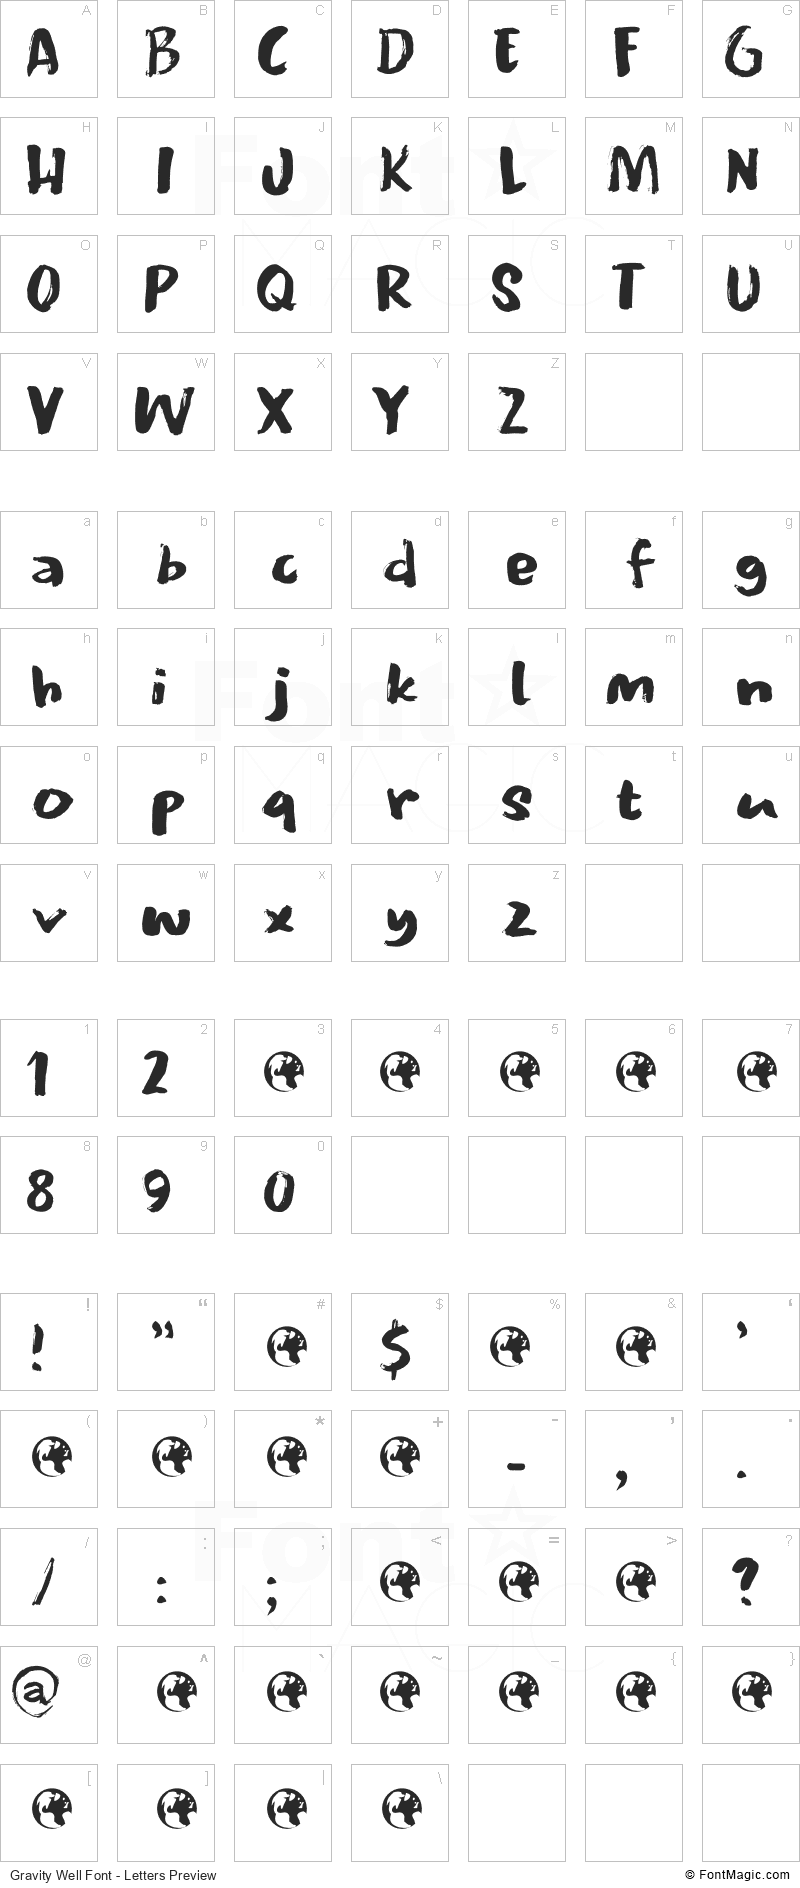 Gravity Well Font - All Latters Preview Chart